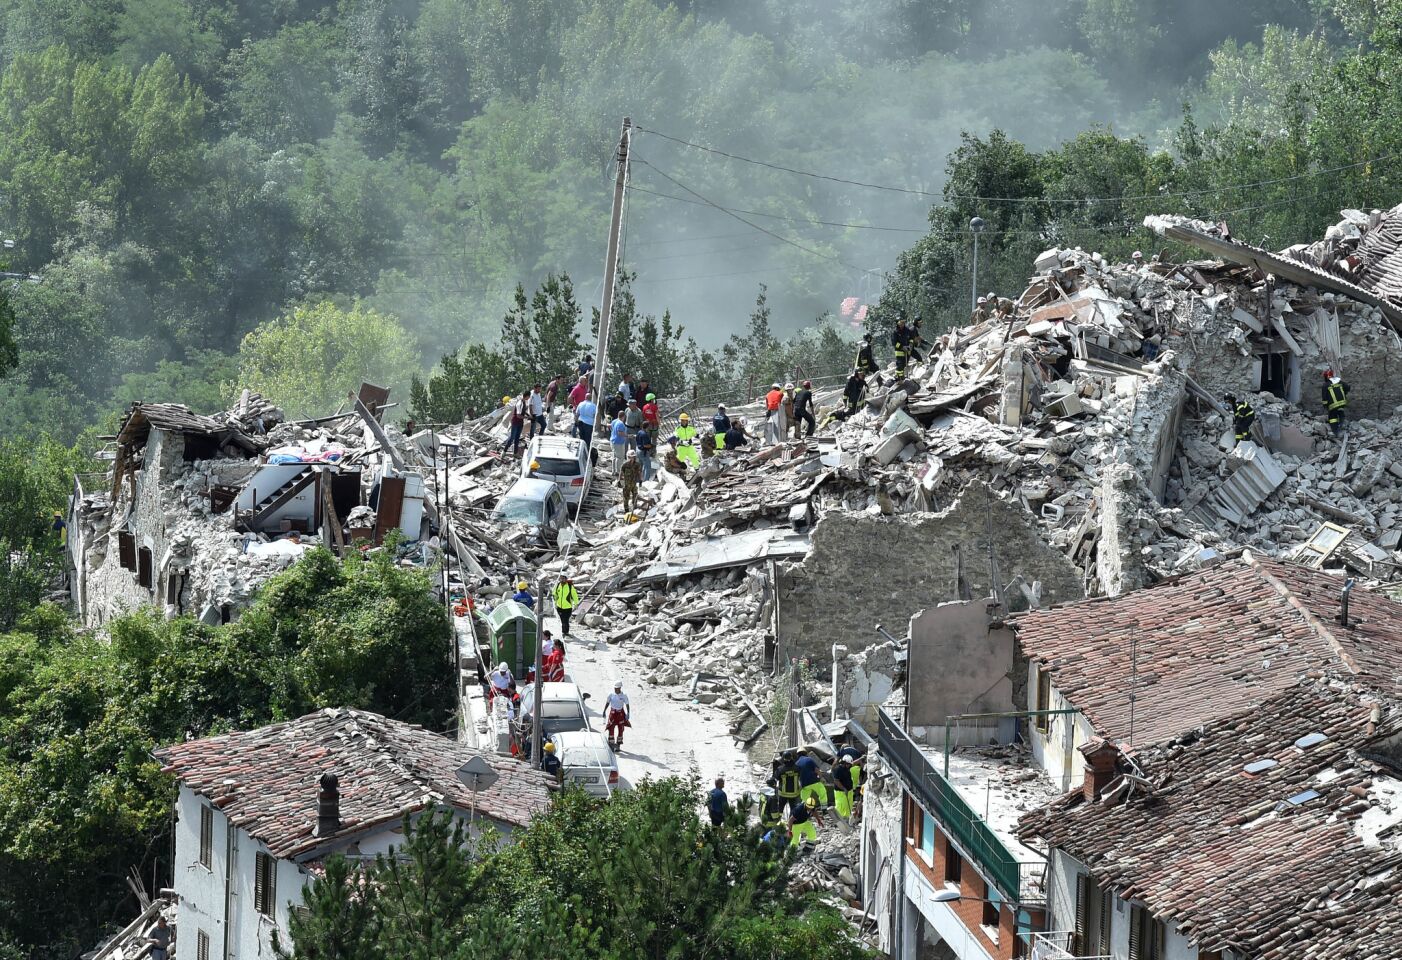 Powerful earthquake in Italy